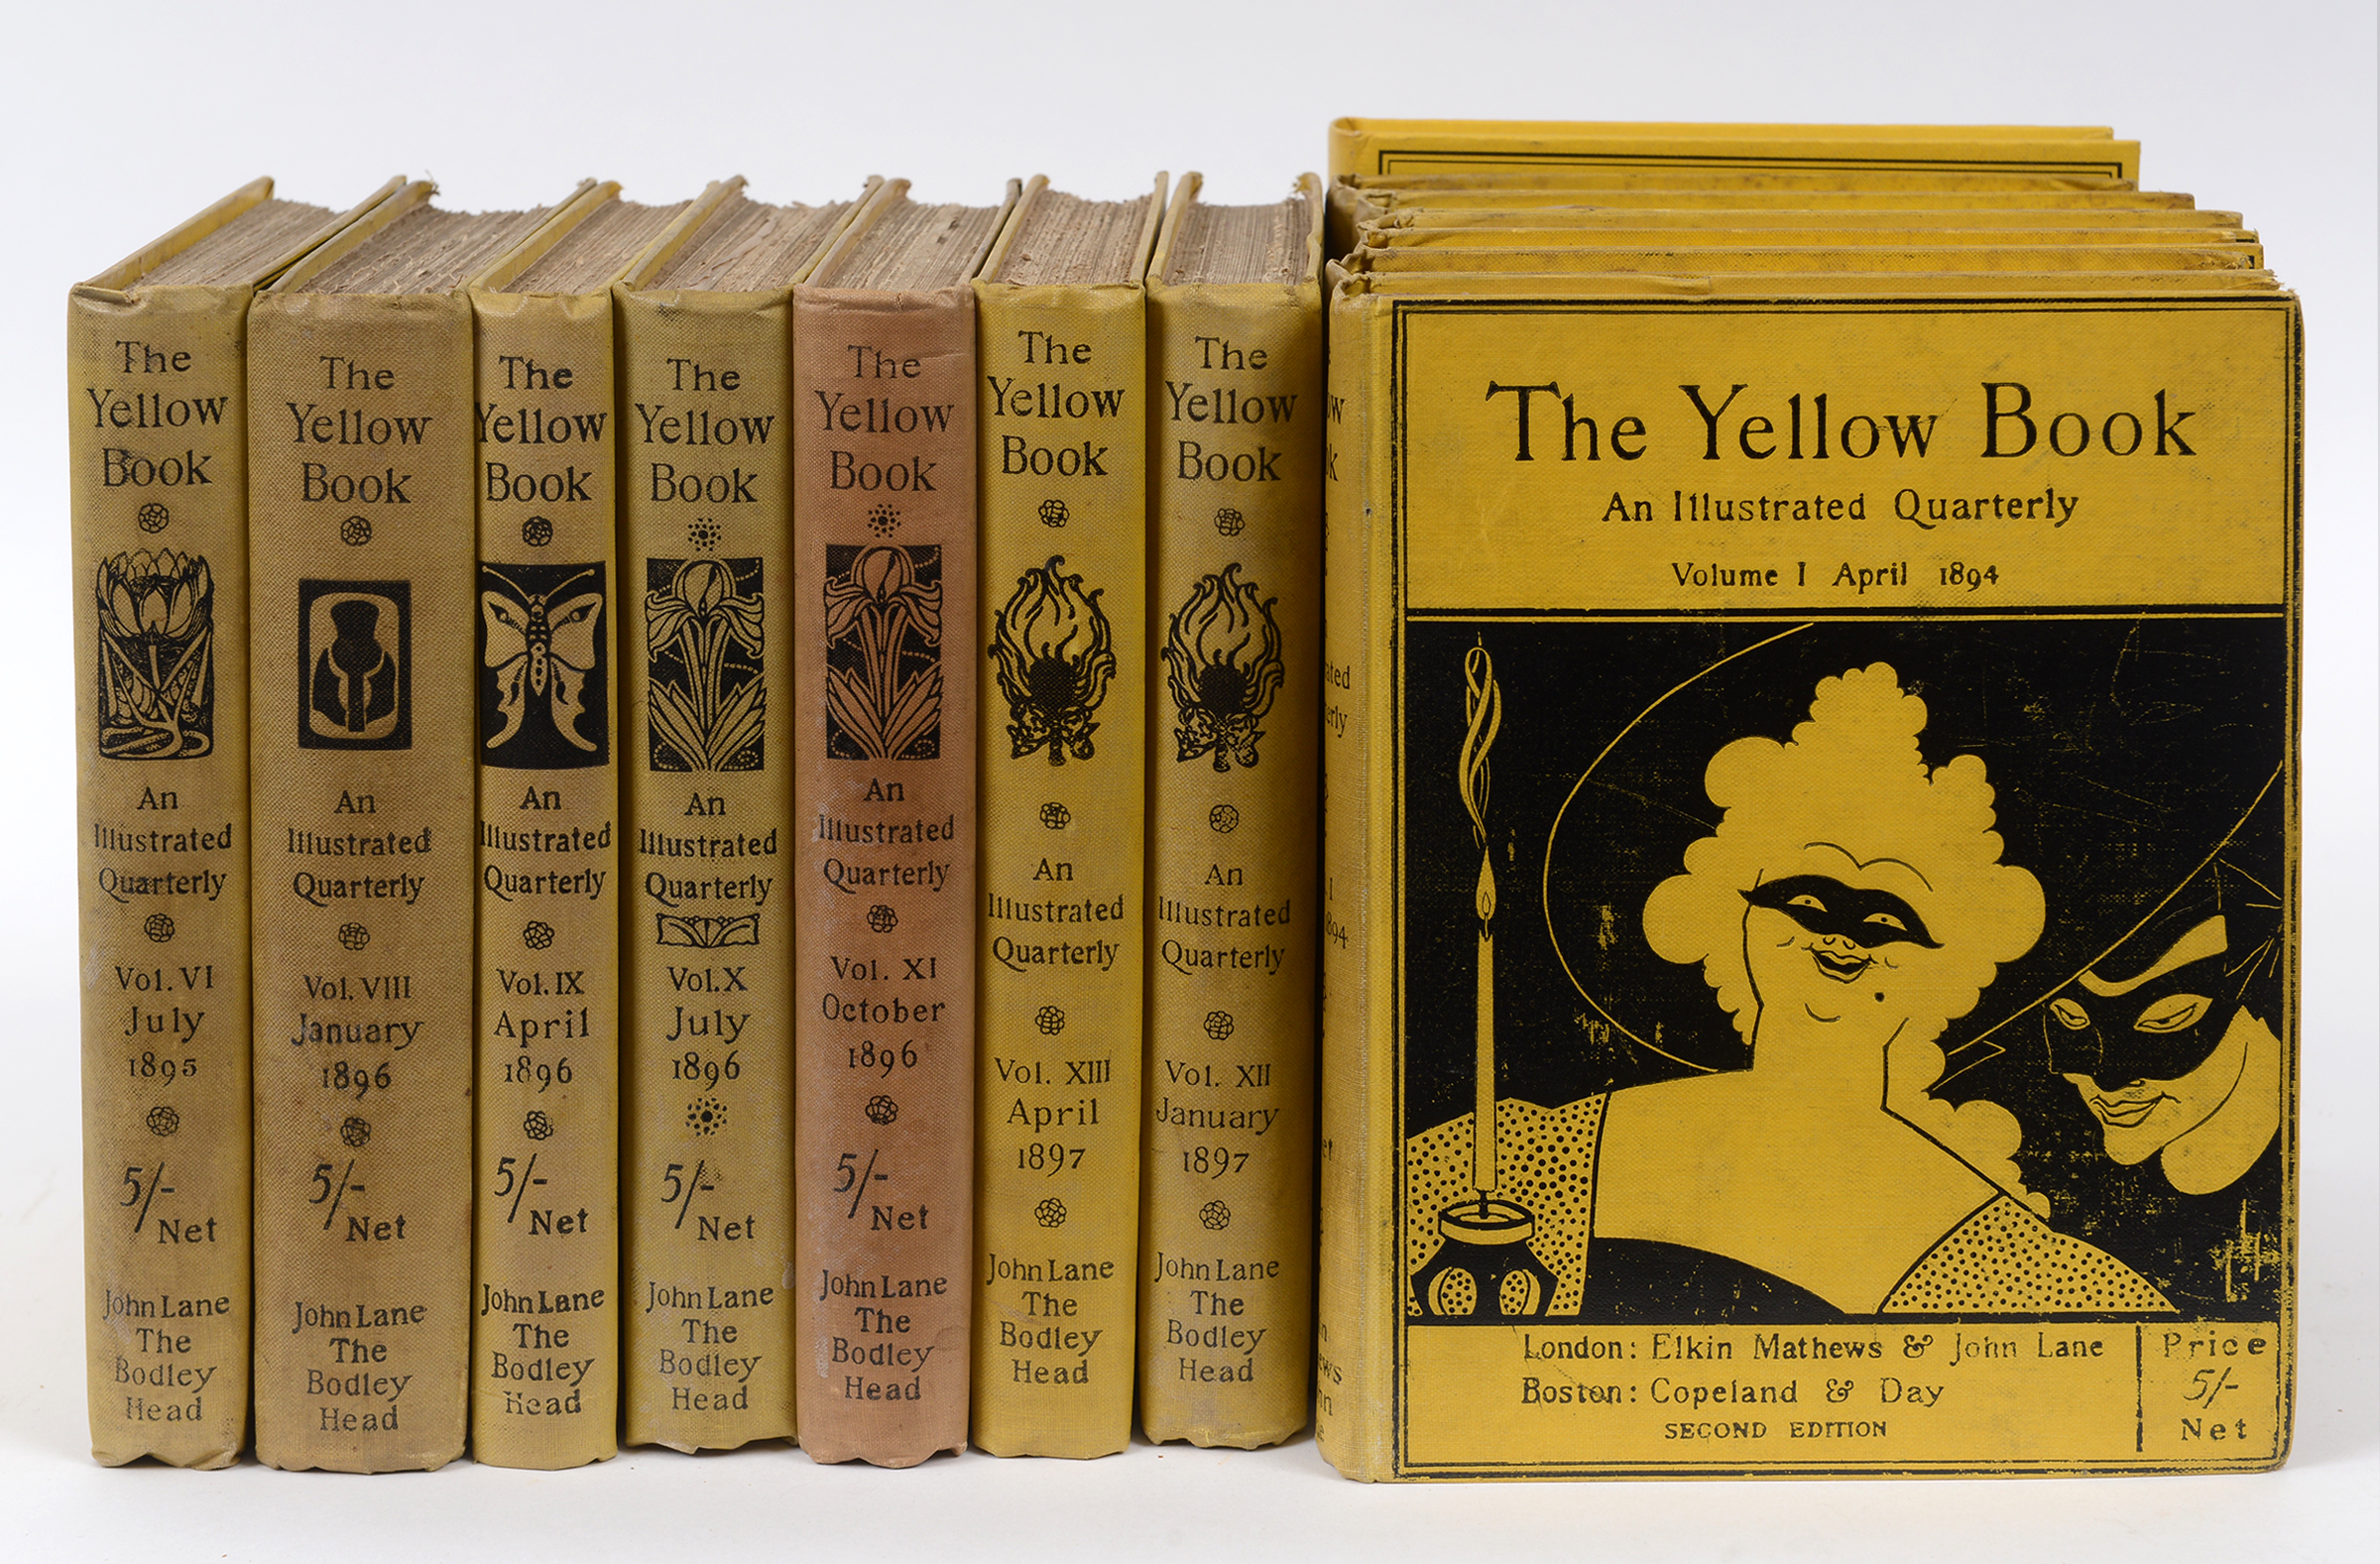 Beardsley (Aubrey) and others, The Yellow Book An Illustrated Quarterly, 1894-97, 13 vols,